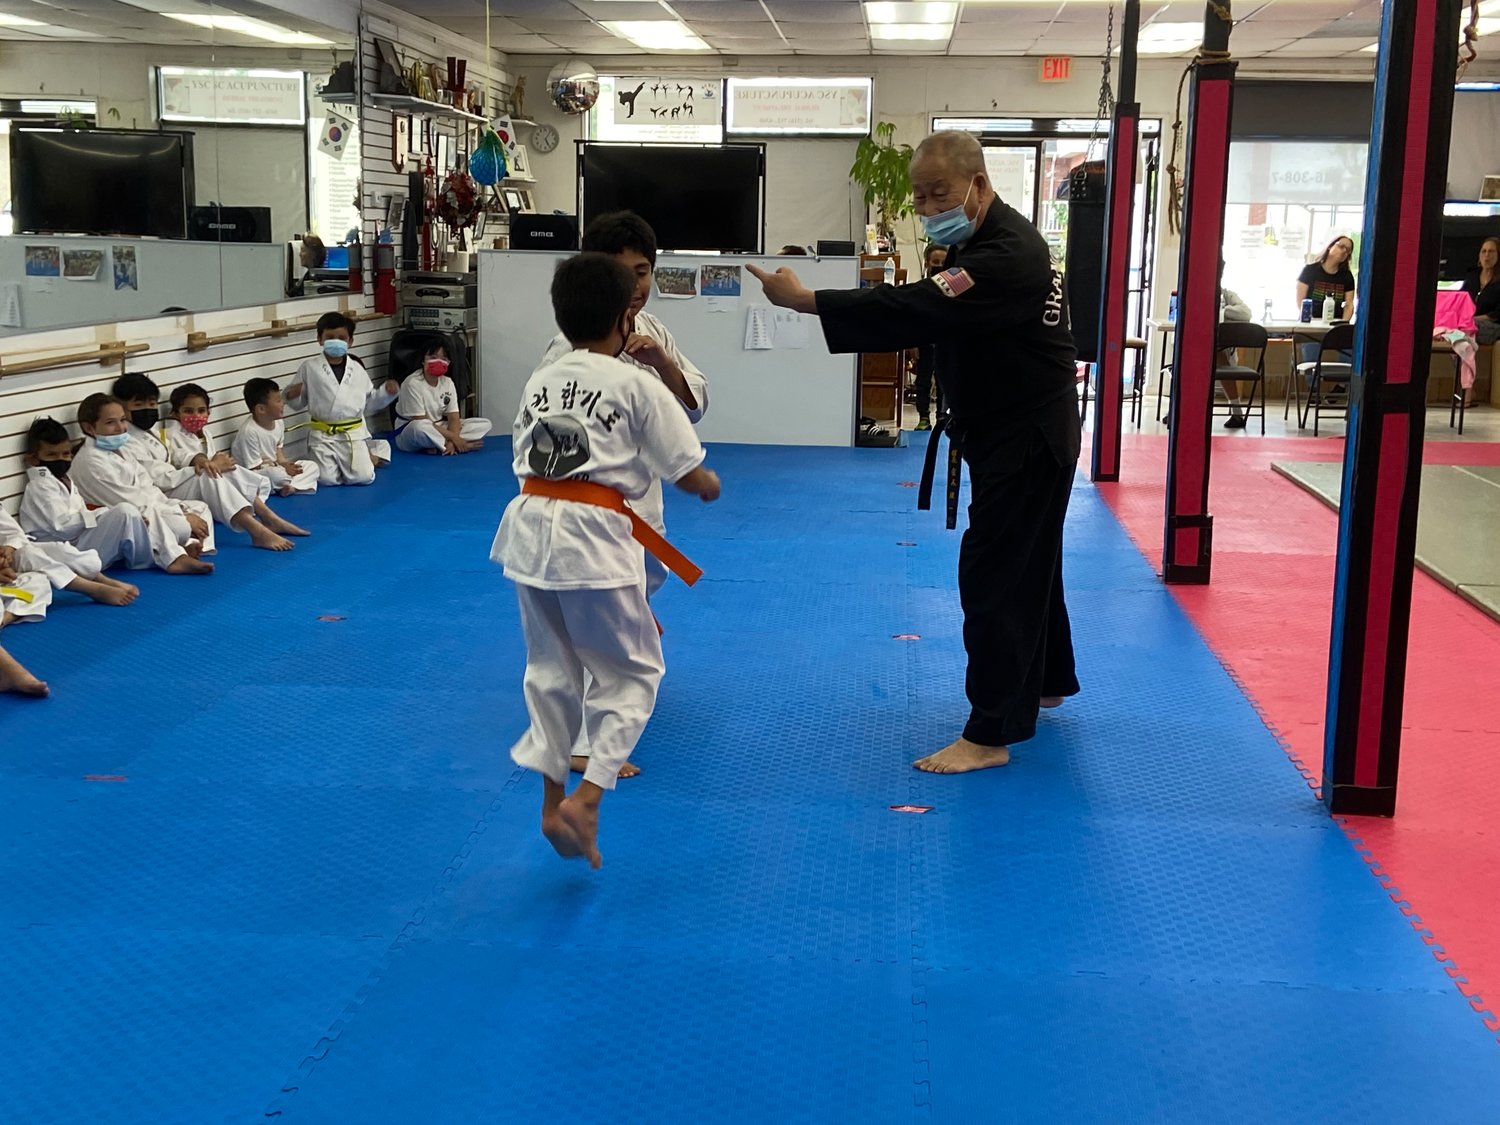 Grandmaster Sung J. Choi has been studying taekwondo since he was a child. Now he shares his skills at his East Meadow GM Choi Do Center.